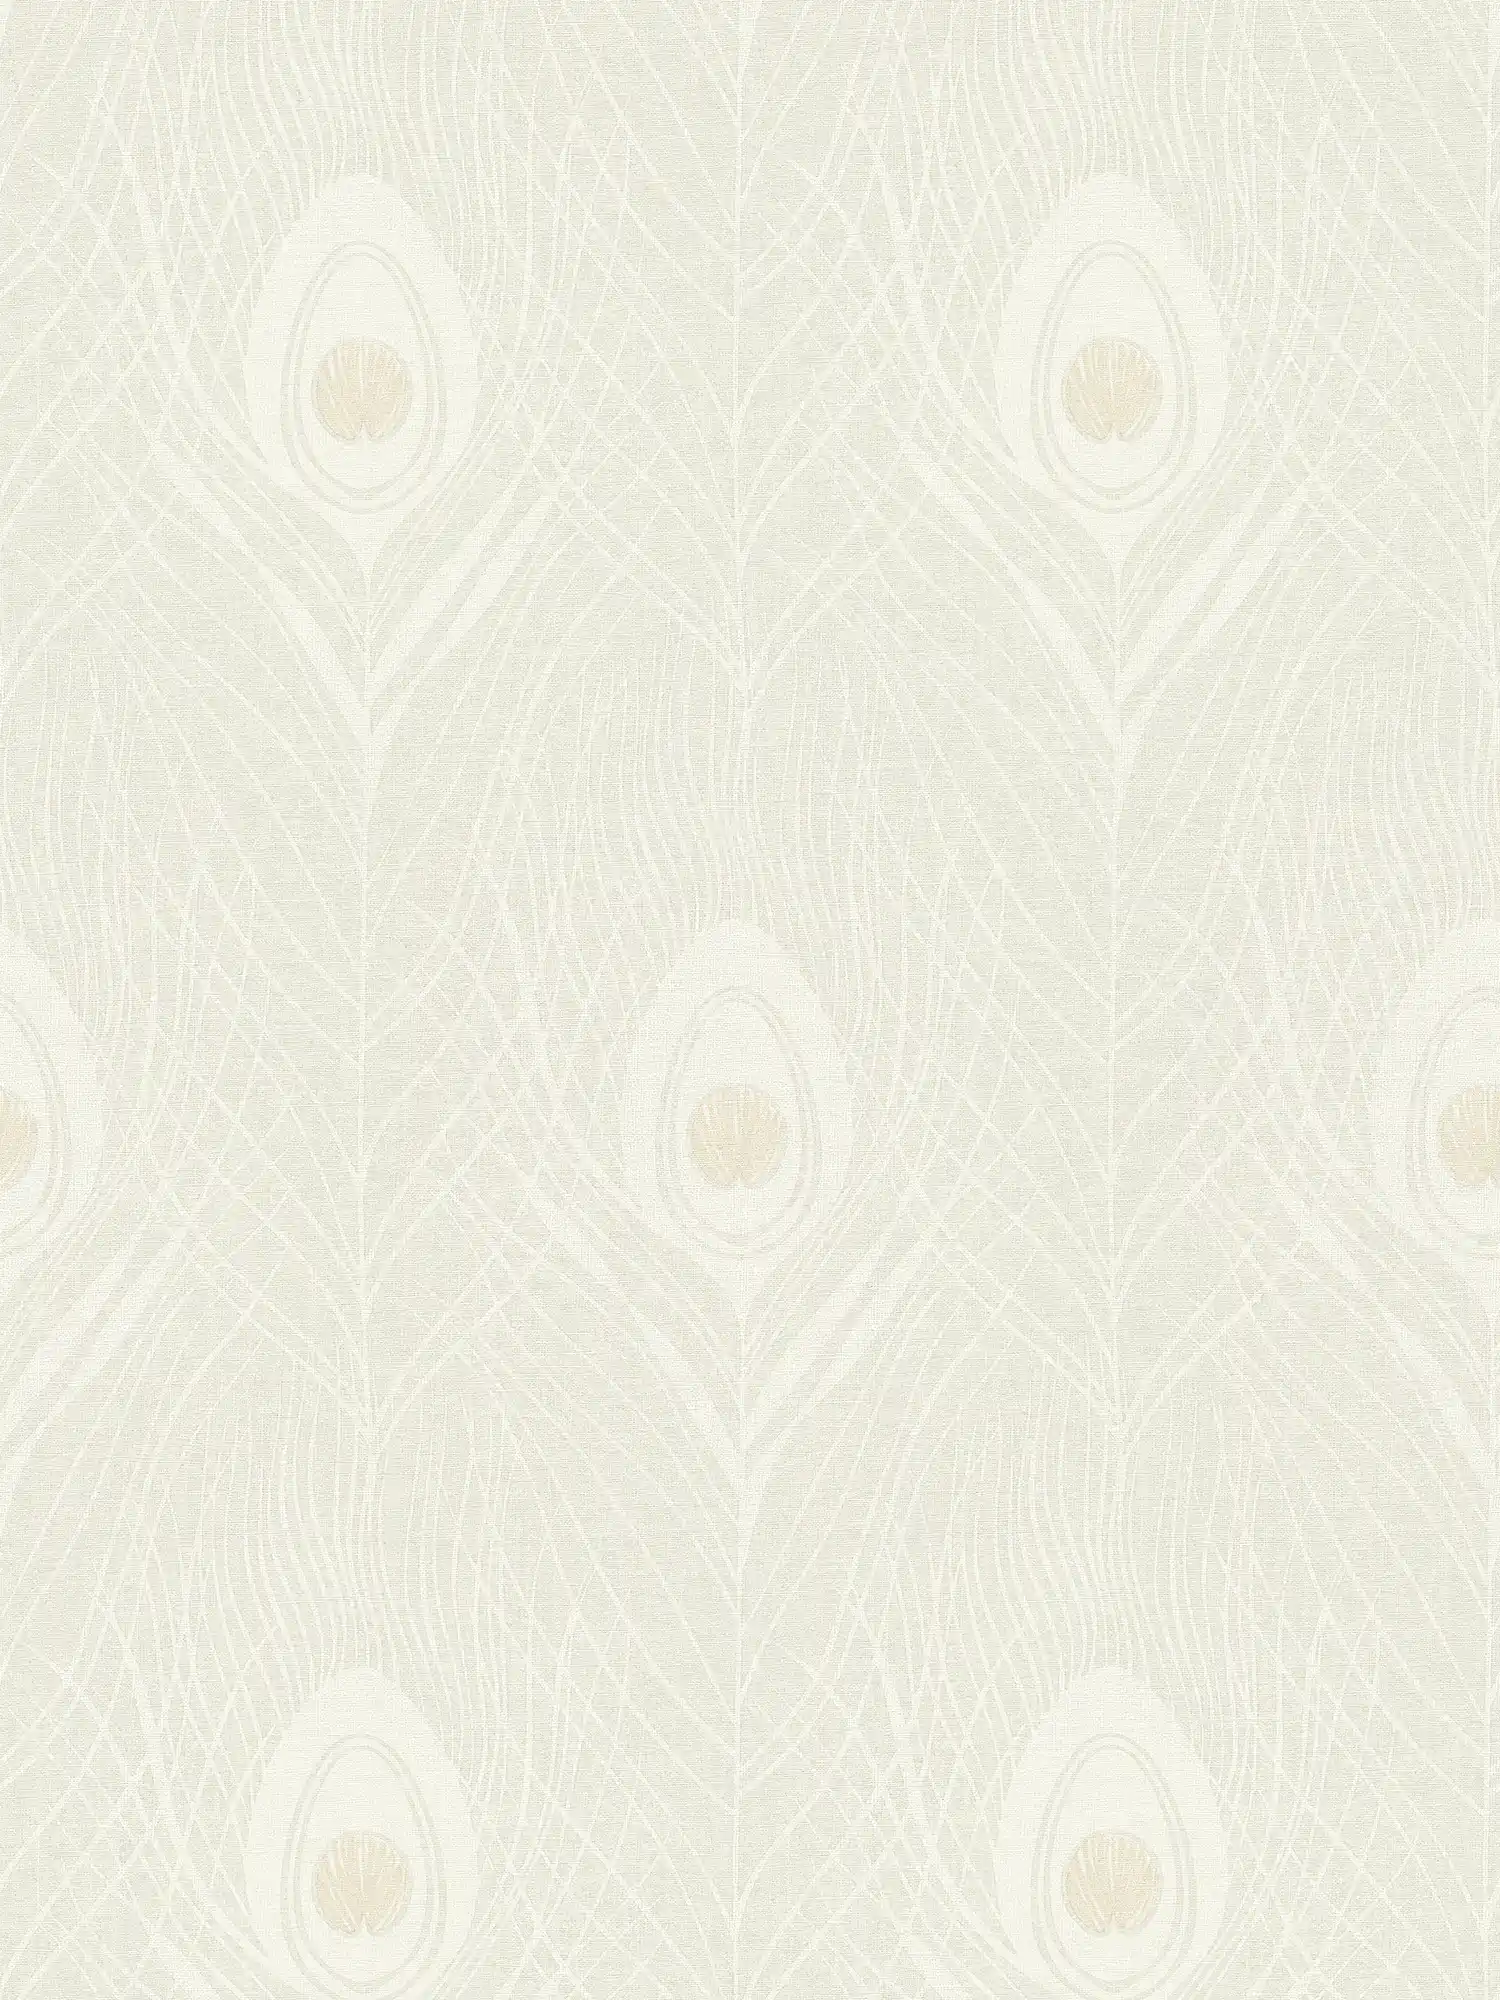 Cream wallpaper with peacock feathers - beige, gold, grey
